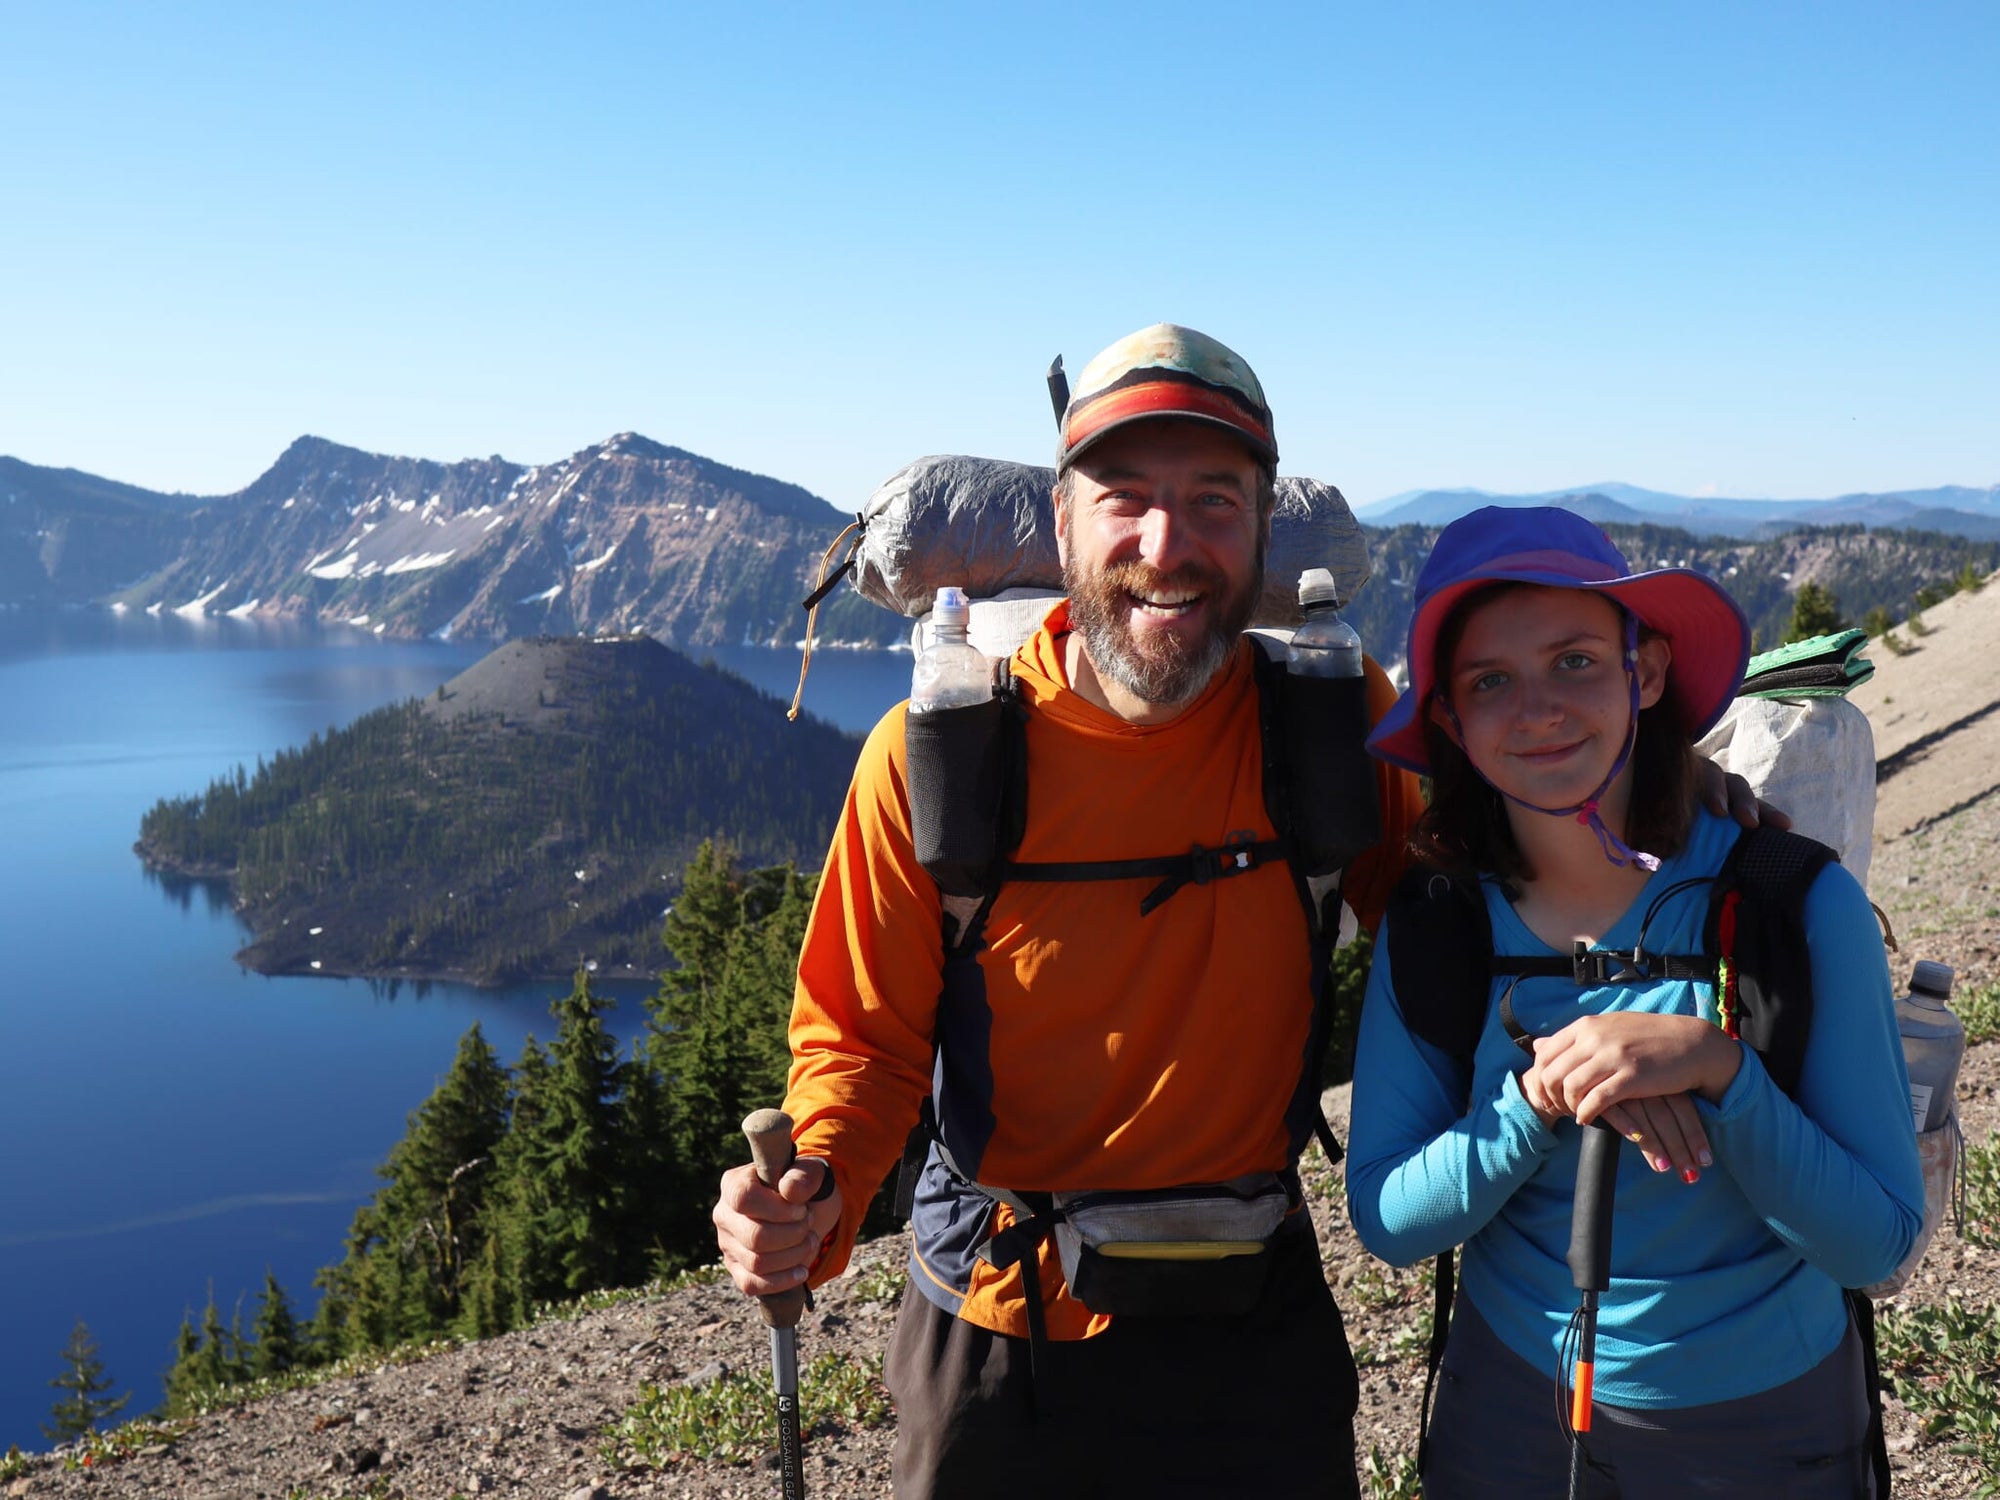 People of the PCT: Quaking Leaf and DigDug